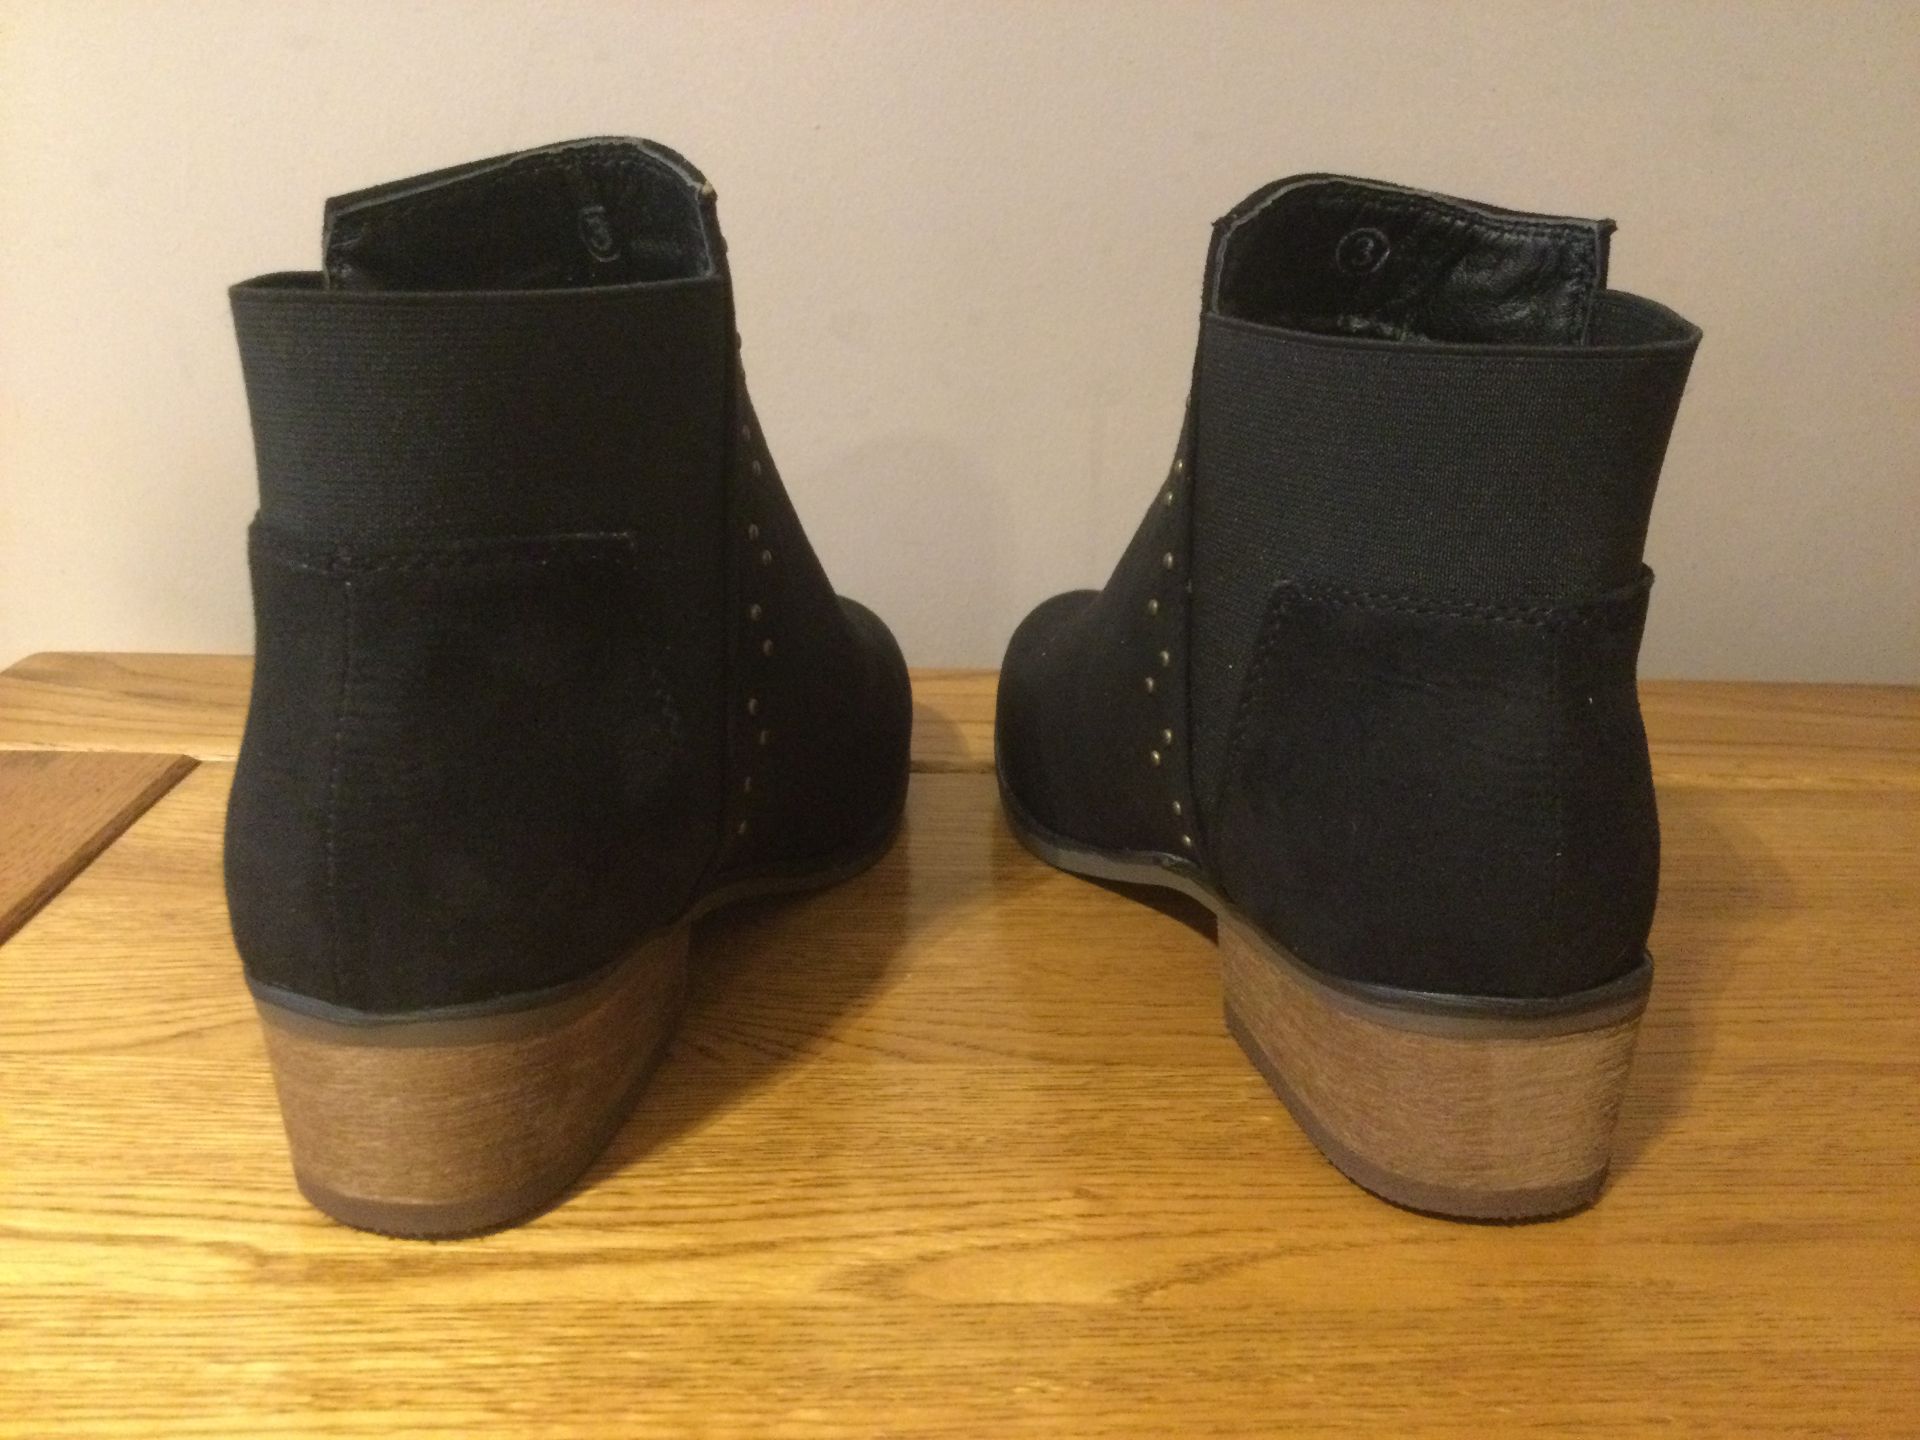 Dolcis “Wendy” Low Heel Ankle Boots, Size 6, Black - New RRP £45.99 - Image 3 of 7